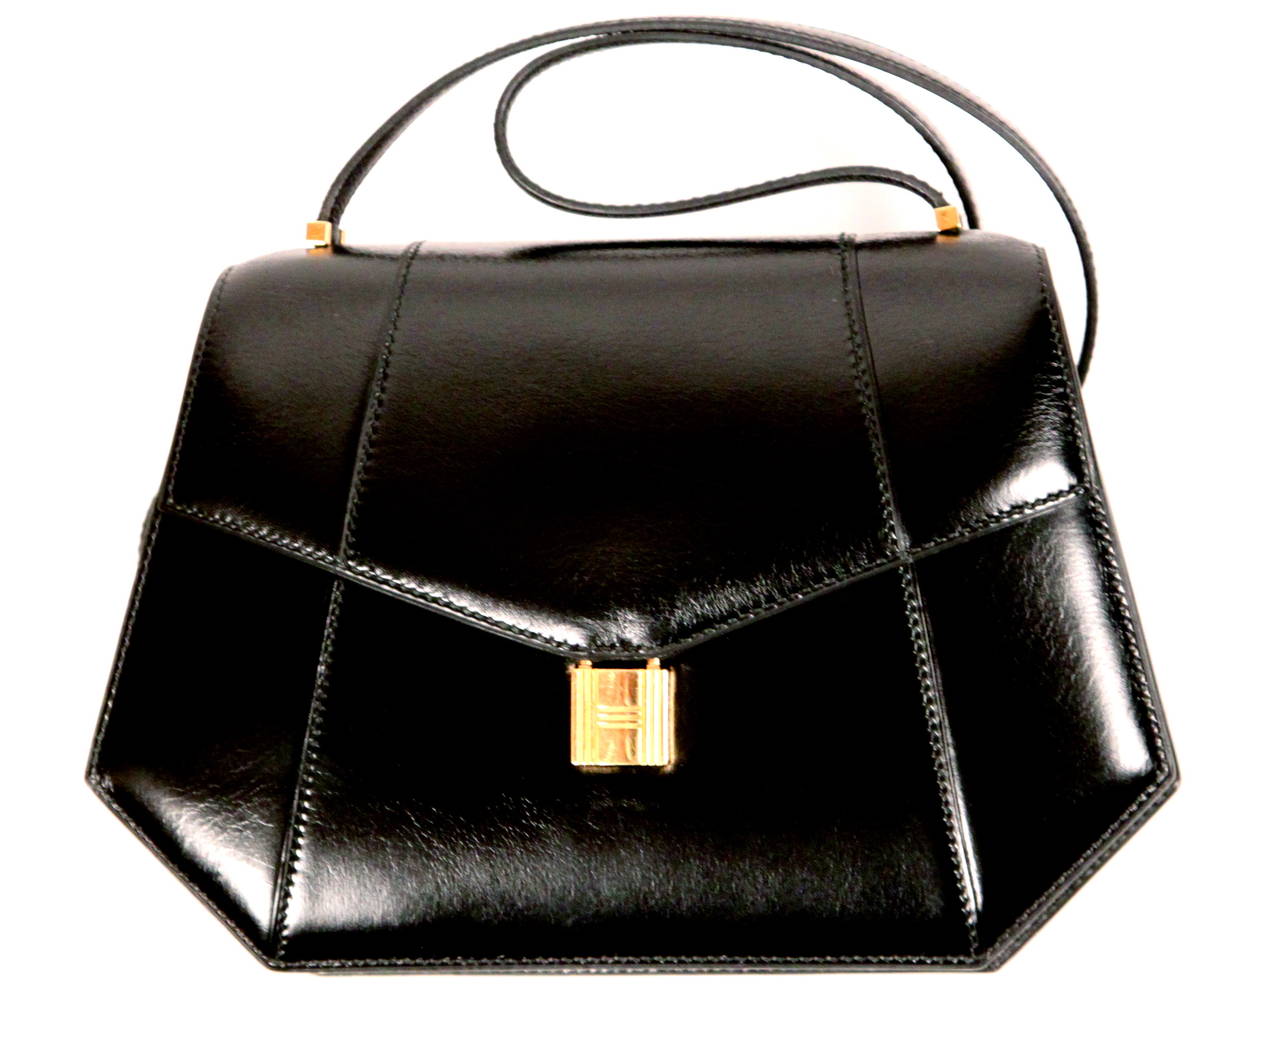 Very rare jet black box leather bag with gold 'padlock' closure from Hermes. Can be used for day or night. Approximate measurements are: 9